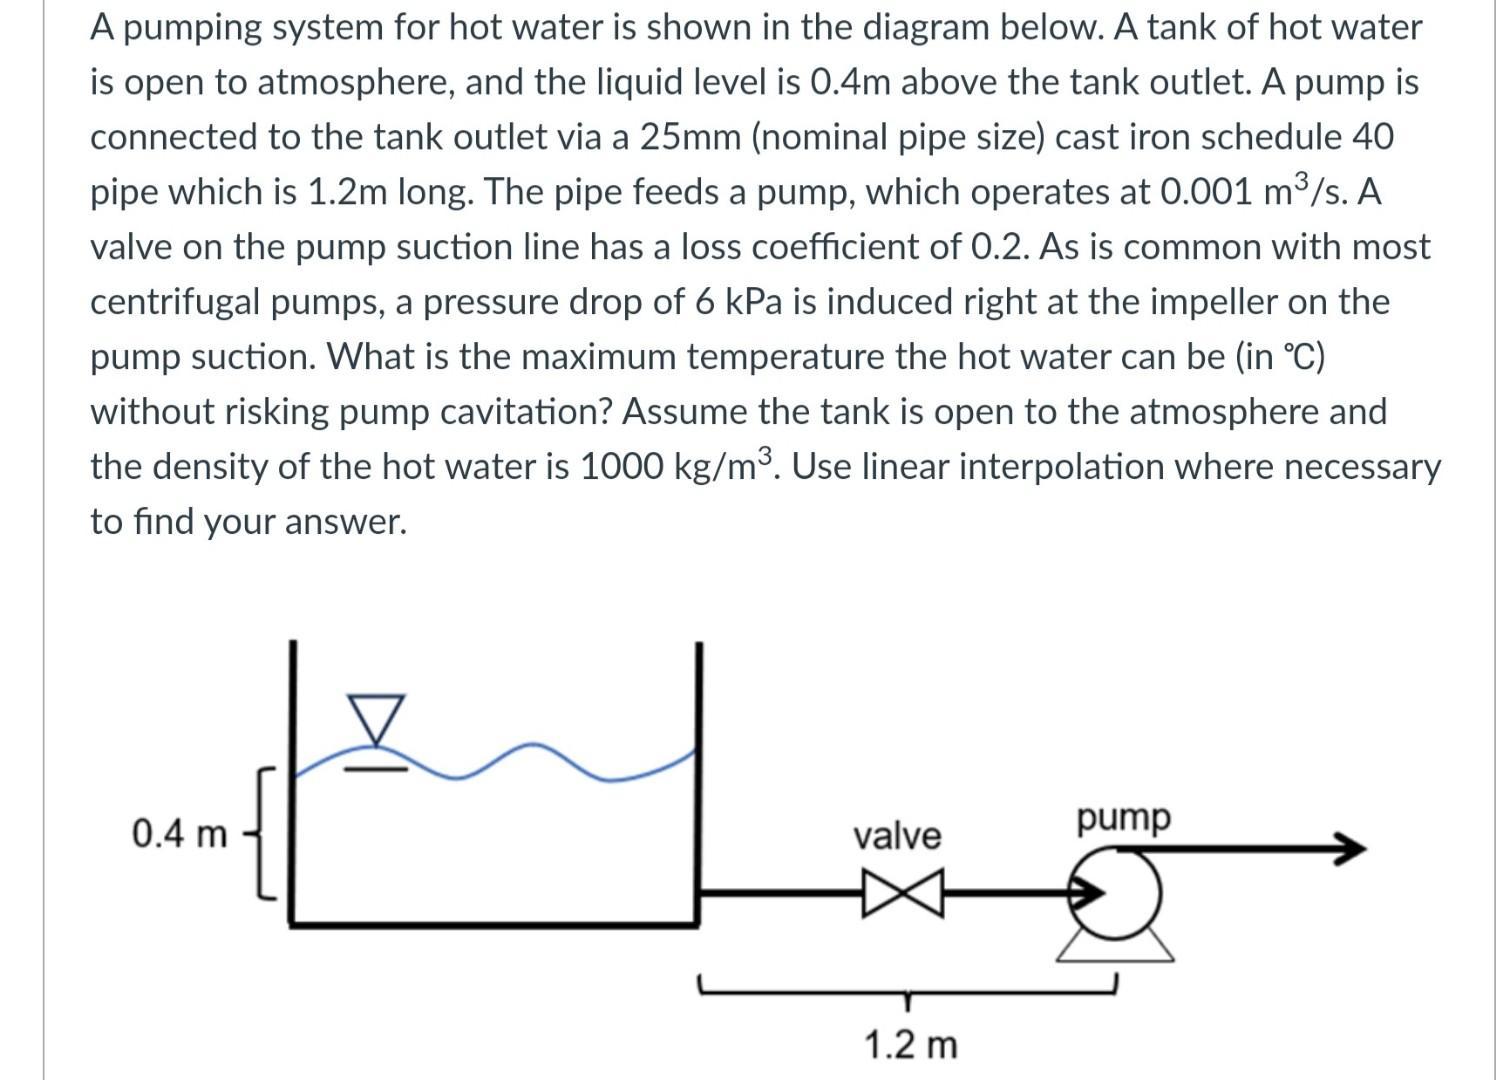 A pumping system for hot water is shown in the diagram below. A tank of hot water is open to atmosphere, and